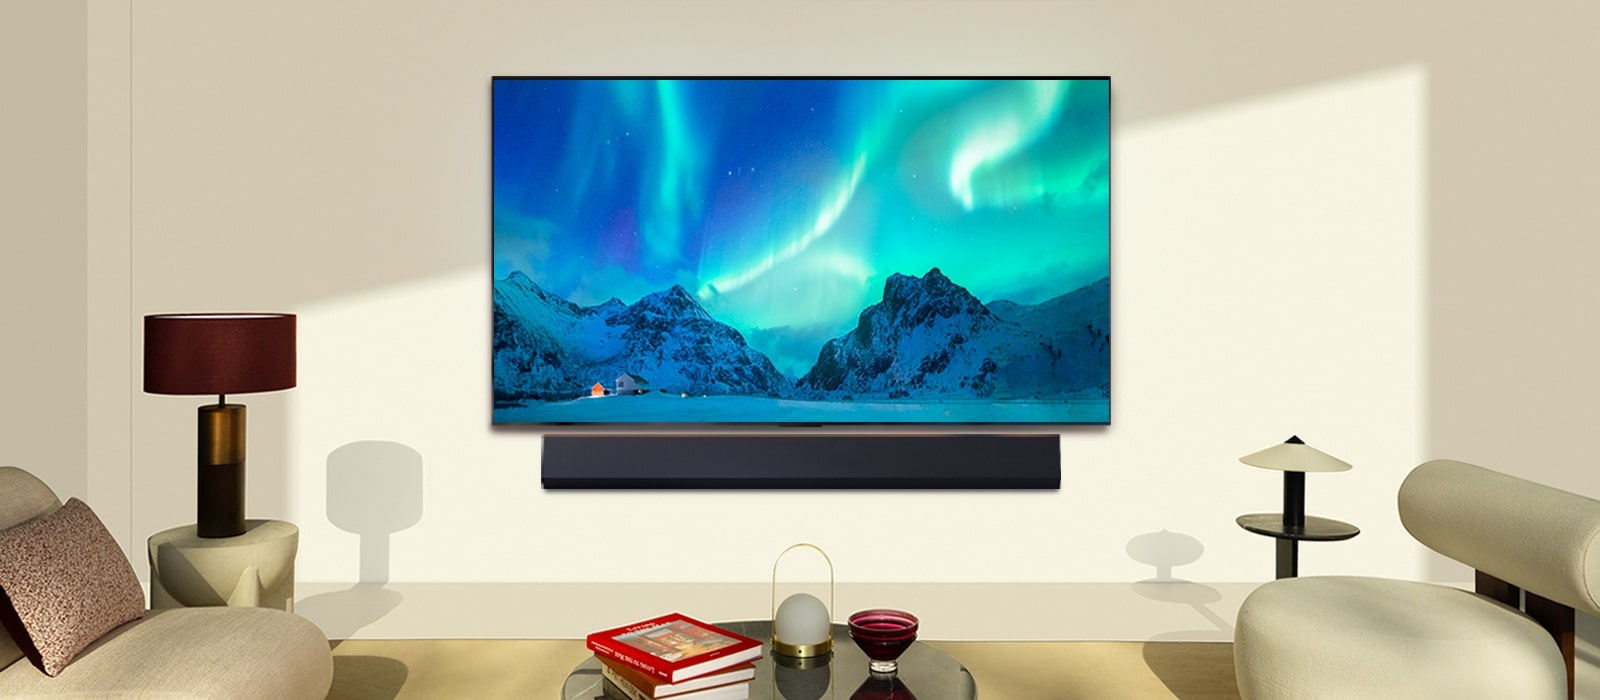 LG OLED TV and LG Soundbar in a modern living space in daytime. The image of the aurora borealis is displayed with the ideal brightness levels.